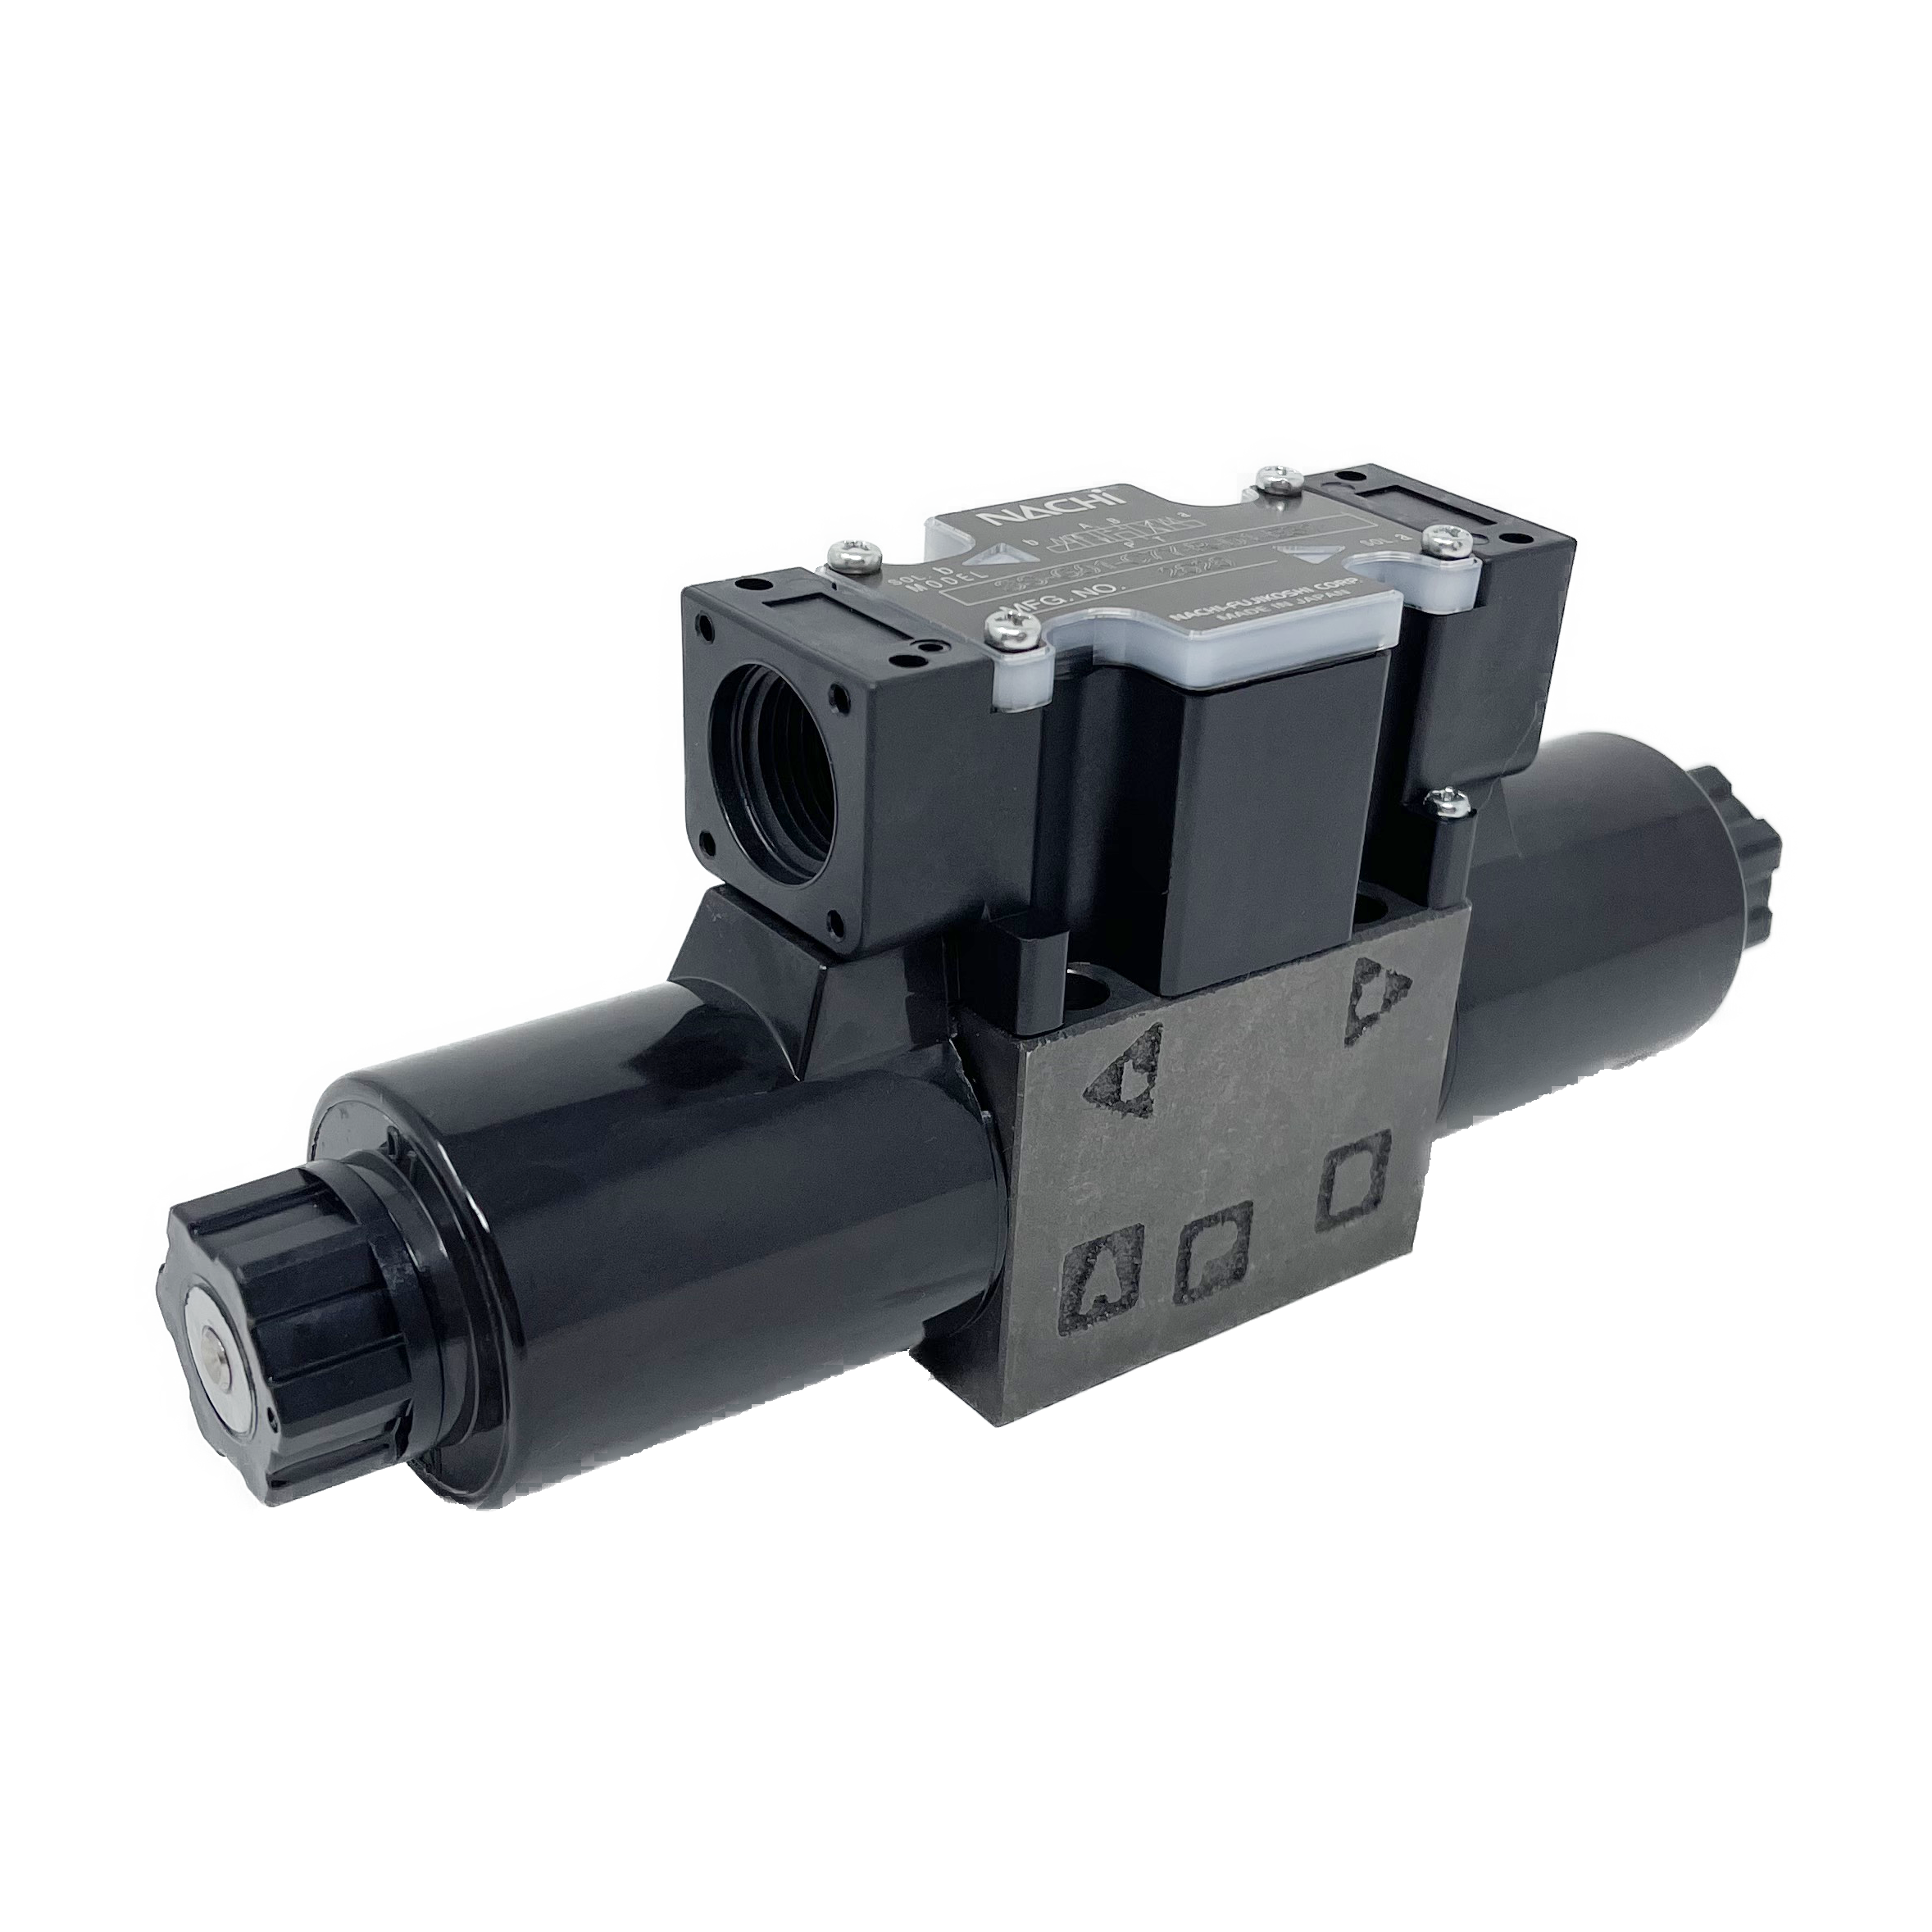 SS-G01-C5-R-C115-E31 : Nachi Solenoid Valve, 3P4W, D03 (NG6), 26.4GPM, 5075psi, All Ports Blocked Neutral, 110 VAC, Wiring Box with Lights